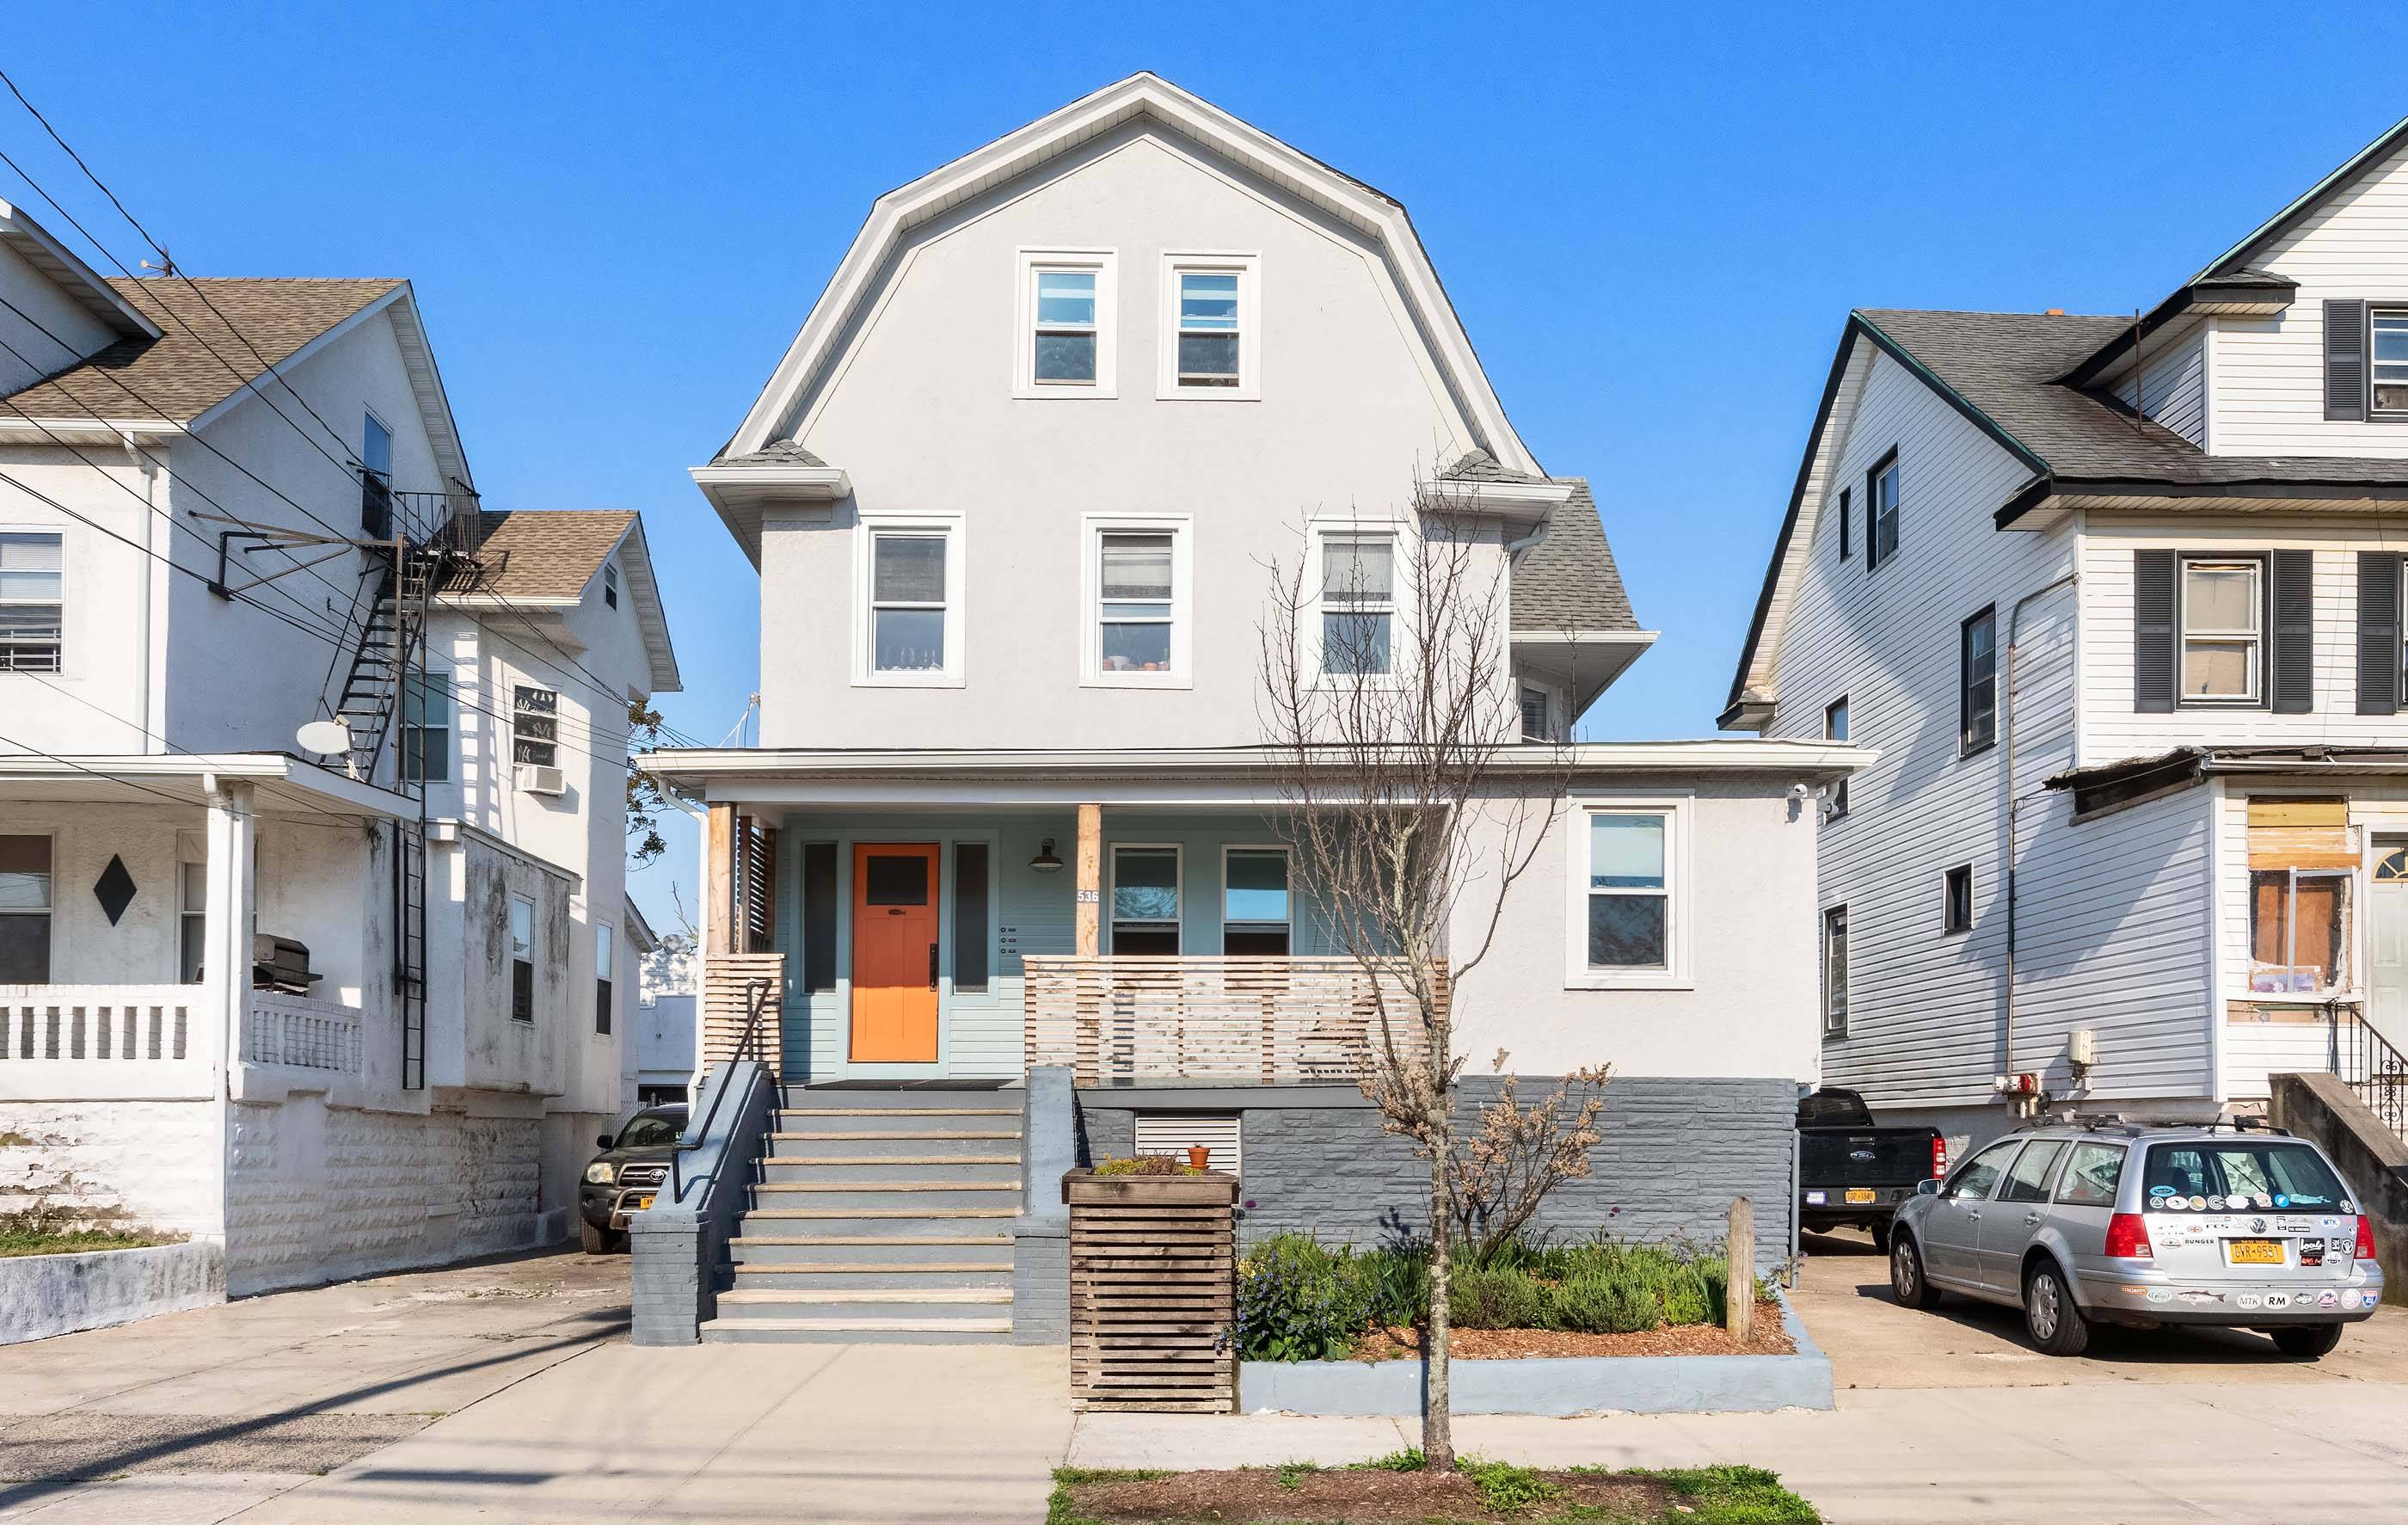 Located in the Arverne section of the Rockaways, this three family home has been beautifully renovated from top to bottom.